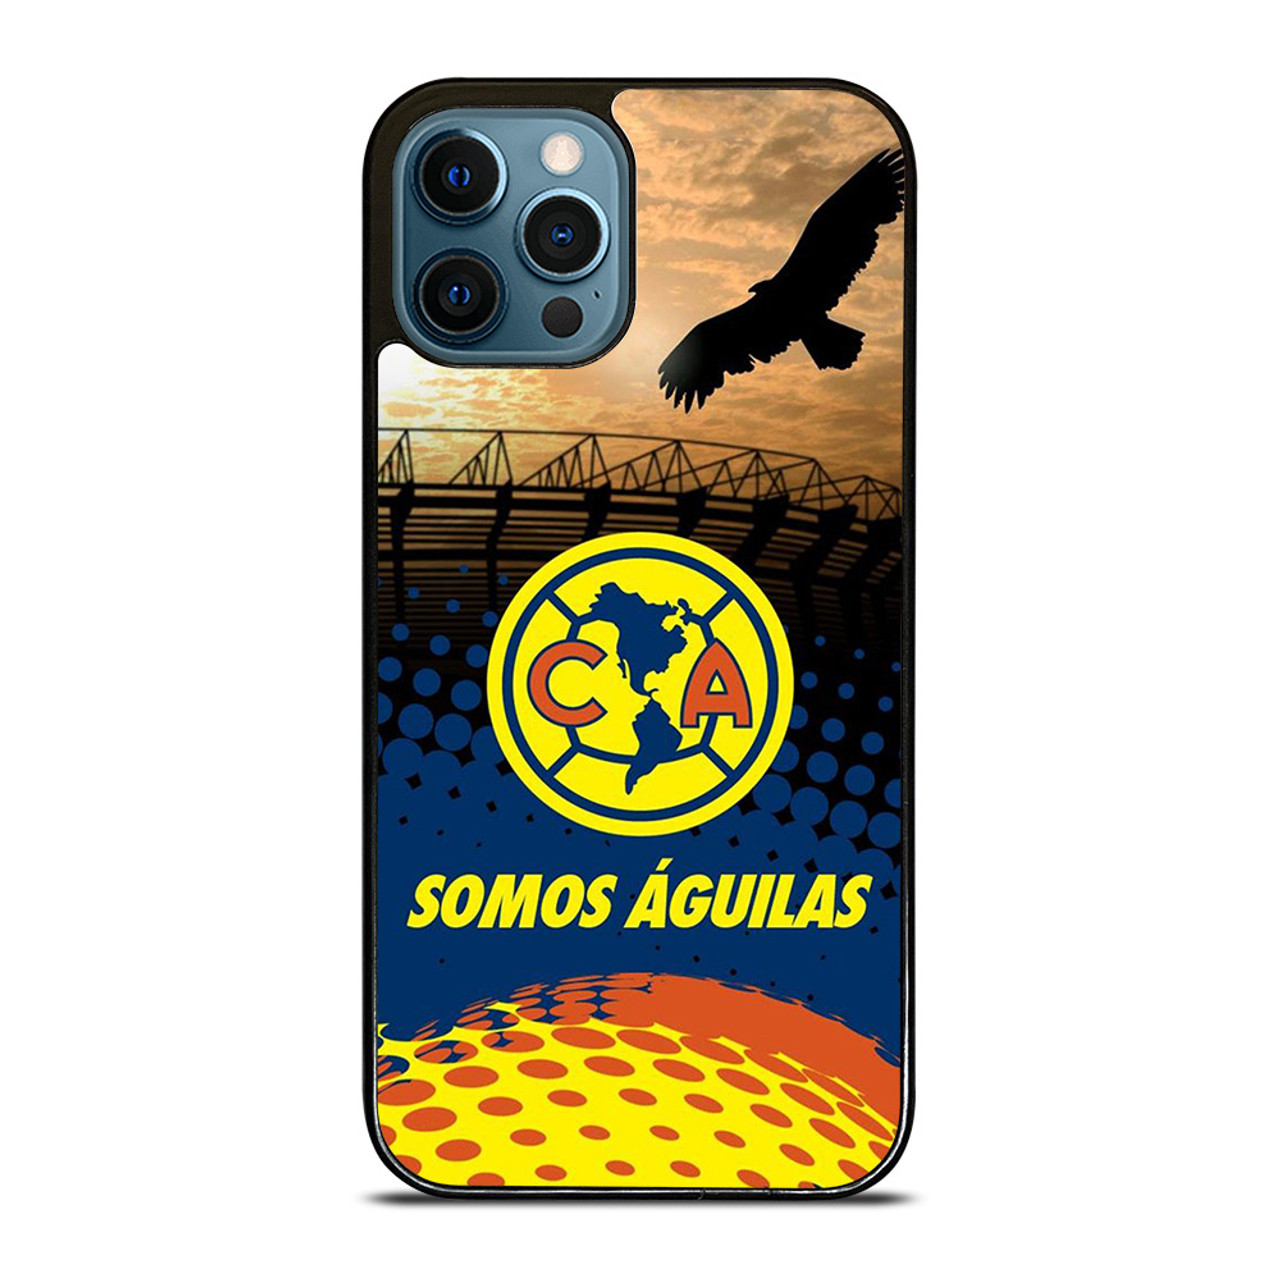 CLUB AMERICA SAMOS AGUILAS NEW iPhone 12 Pro Case Cover